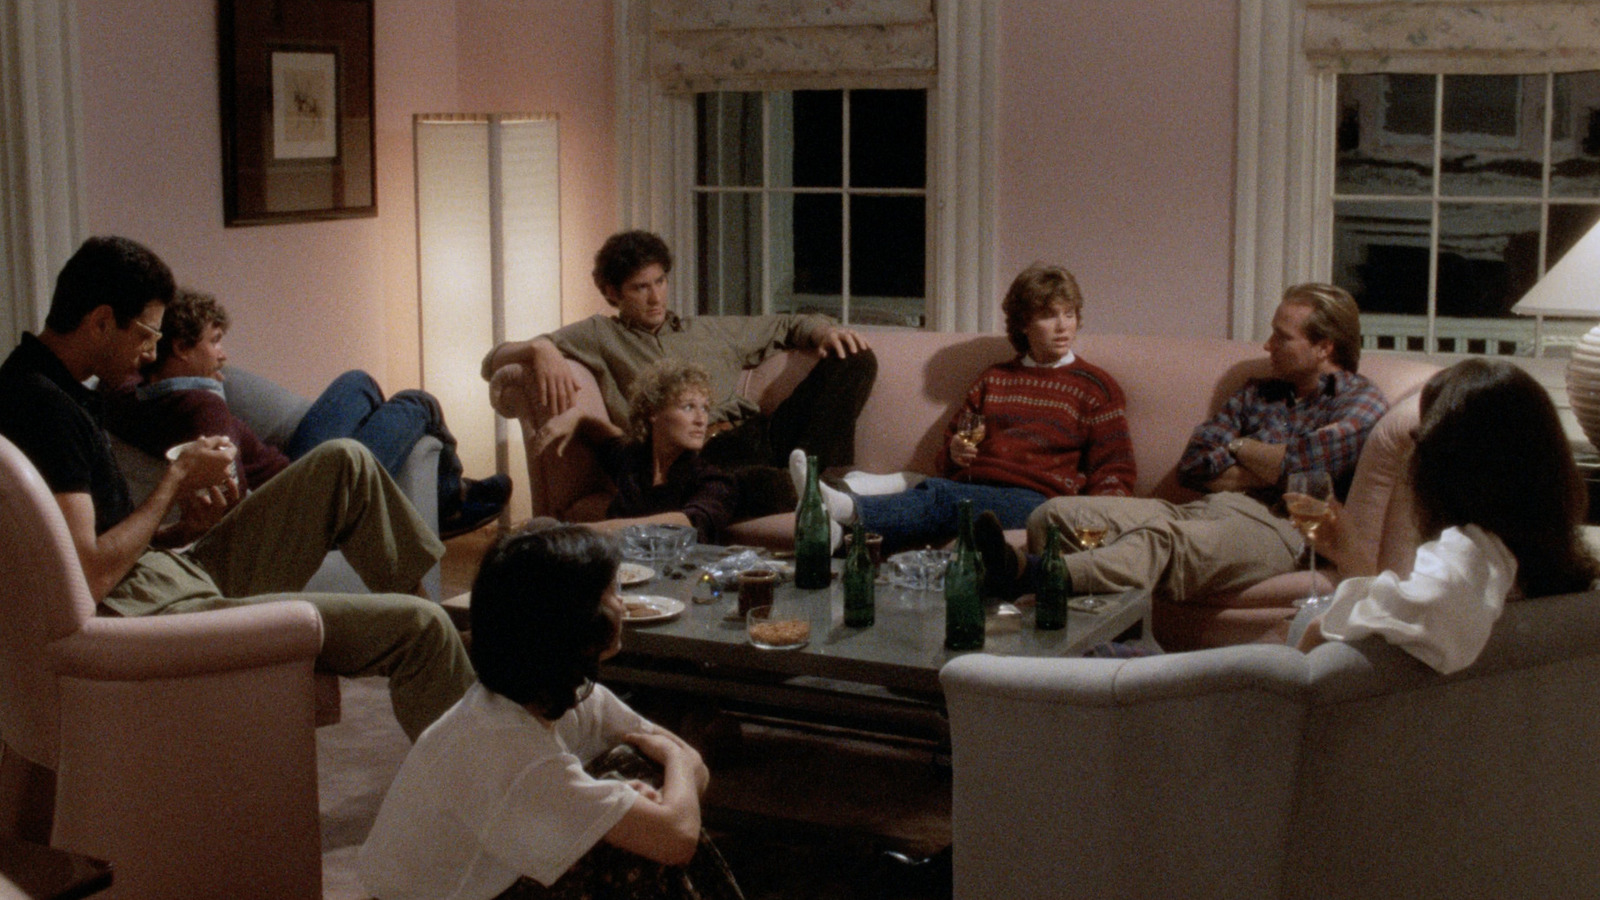 How Lawrence Kasdan Truly Feels About The Idea Of A Big Chill Sequel